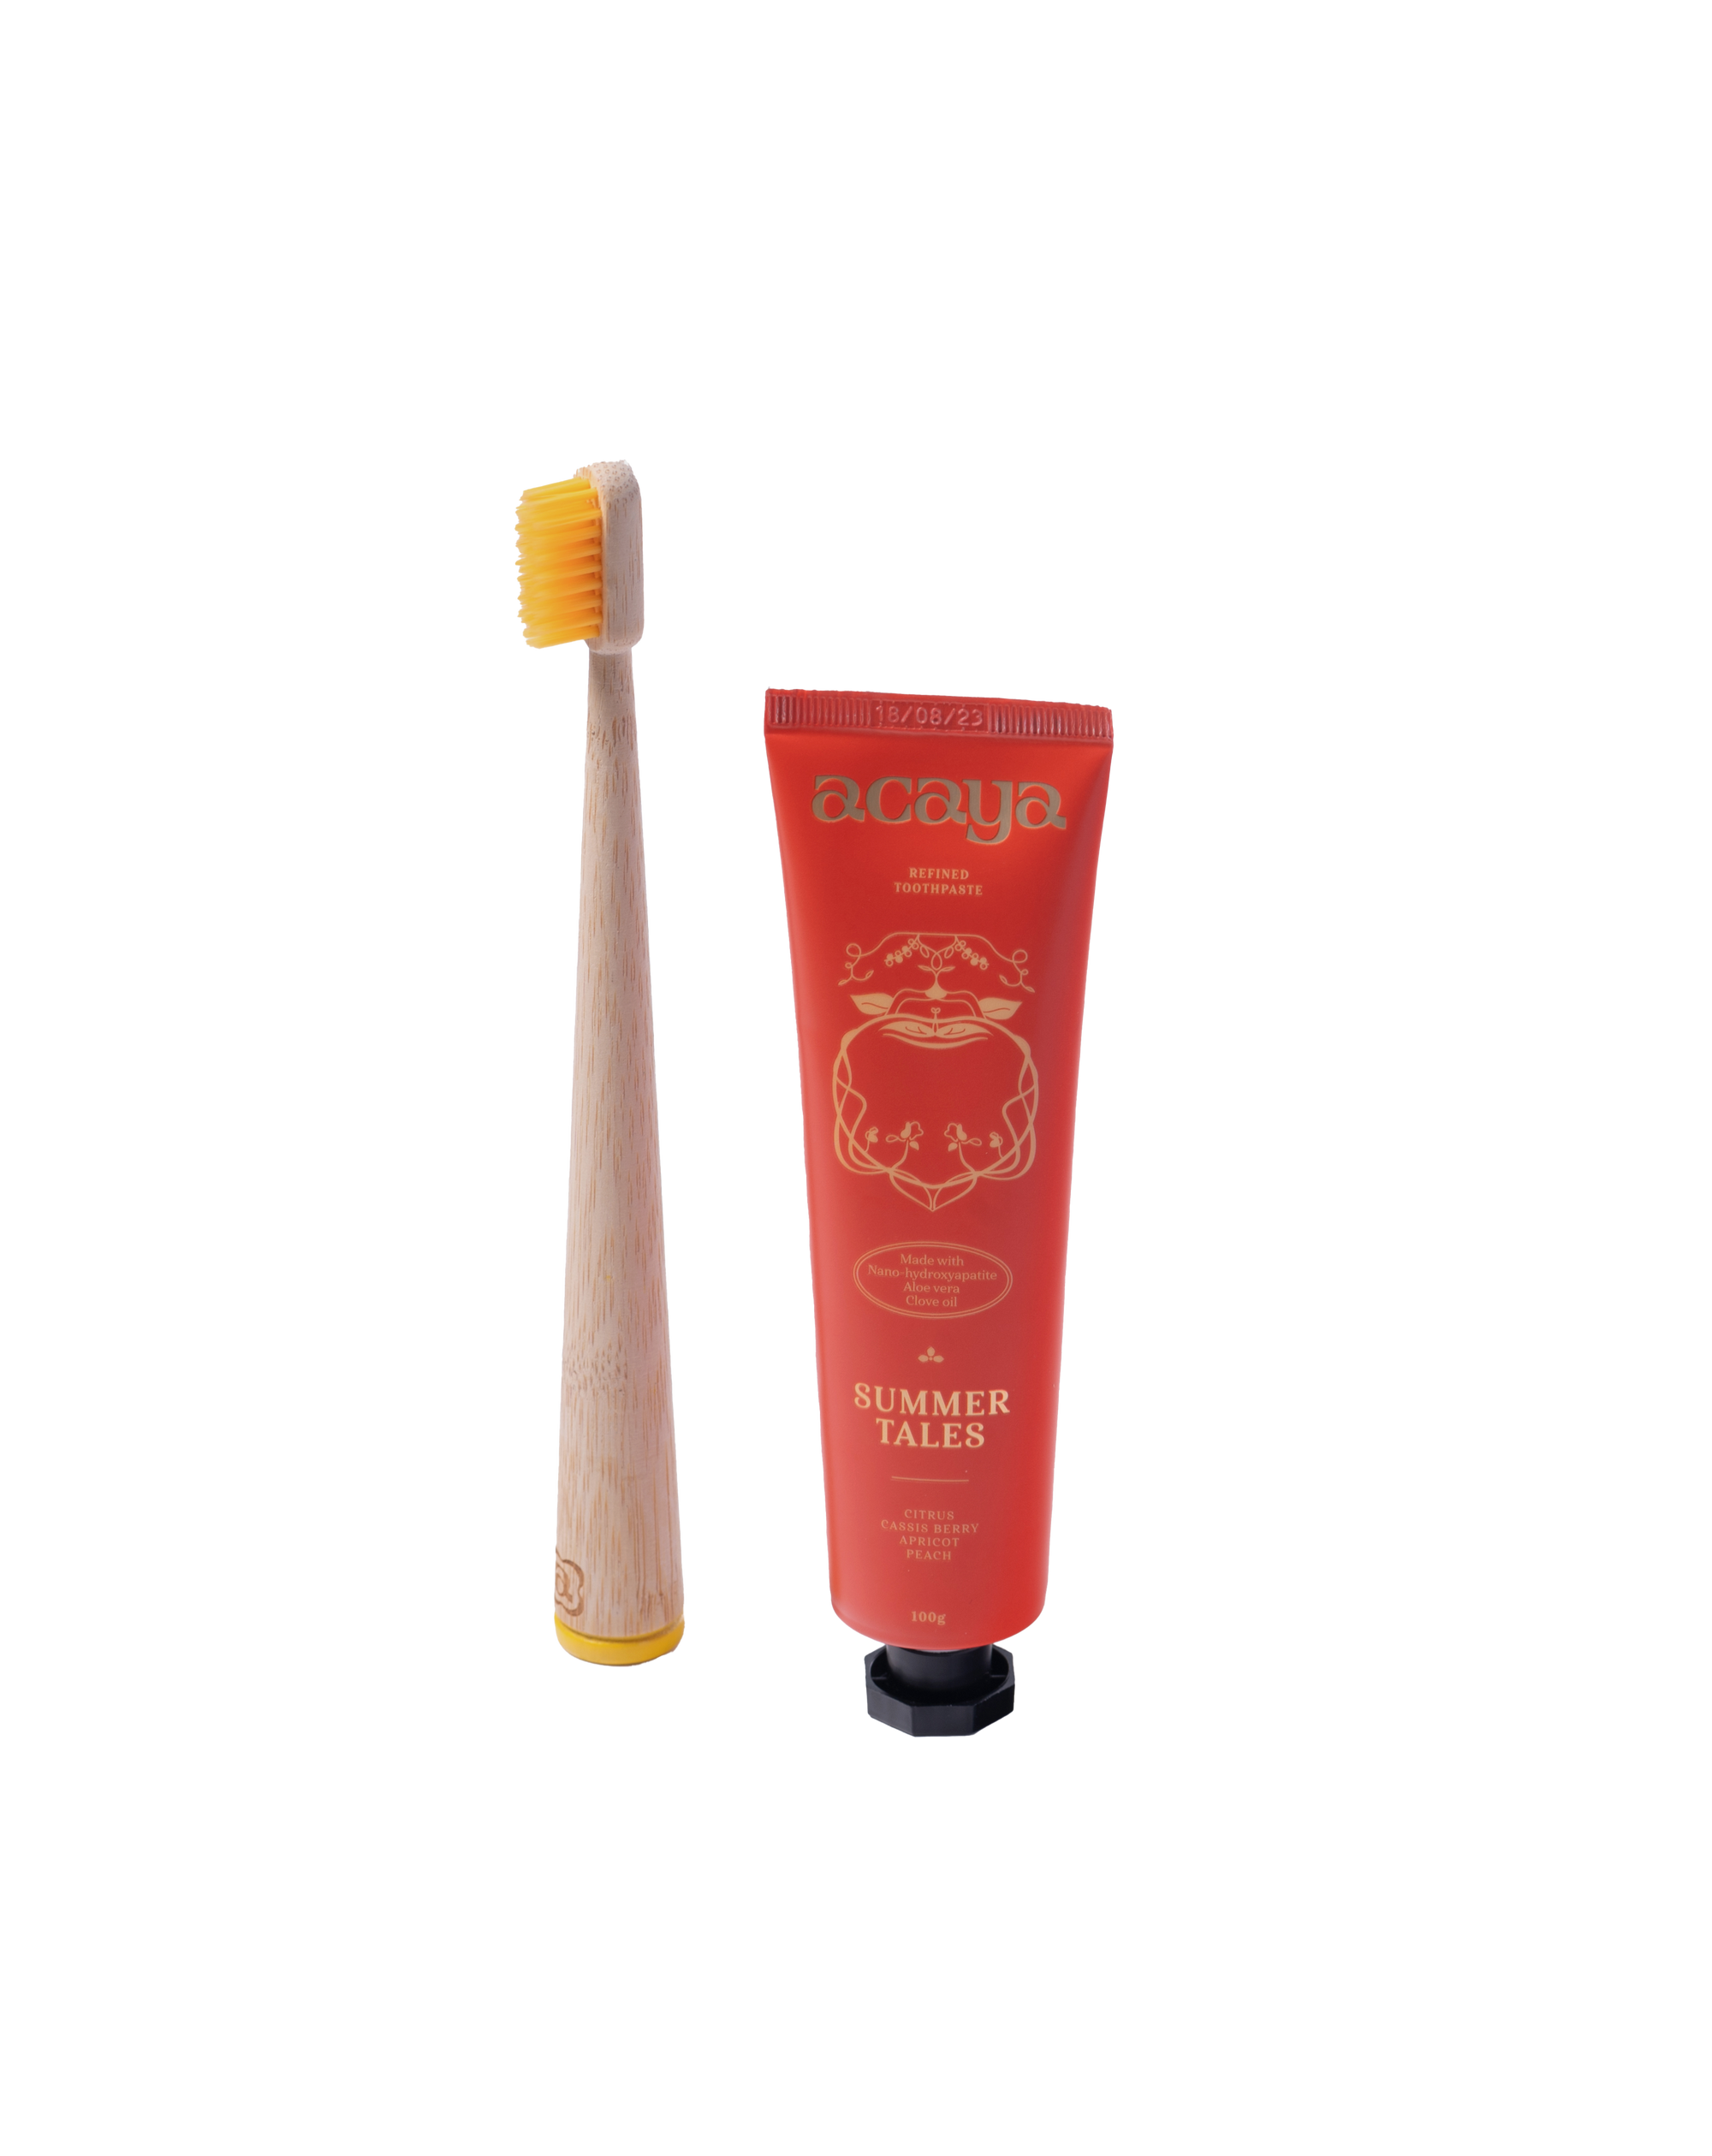 Acaya Summer Tales toothpaste tube & Sunkissed Yellow toothbrush